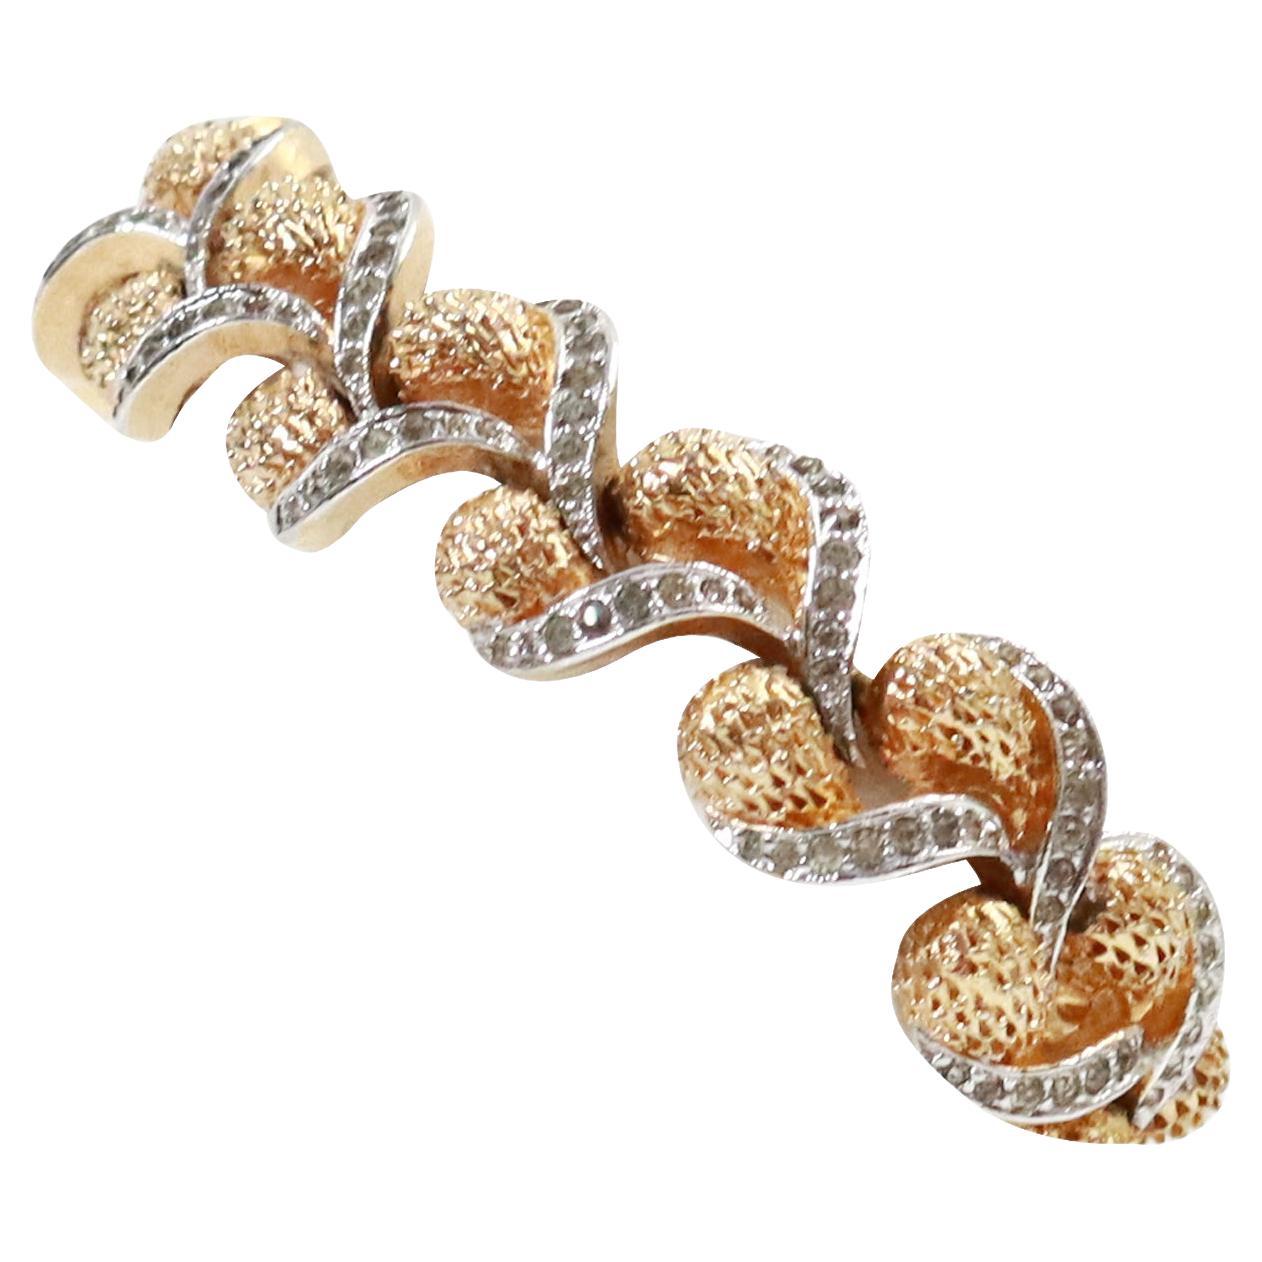 Vintage Panetta Gold Braided Bracelet with Clear Pave Stones Circa 1960s For Sale